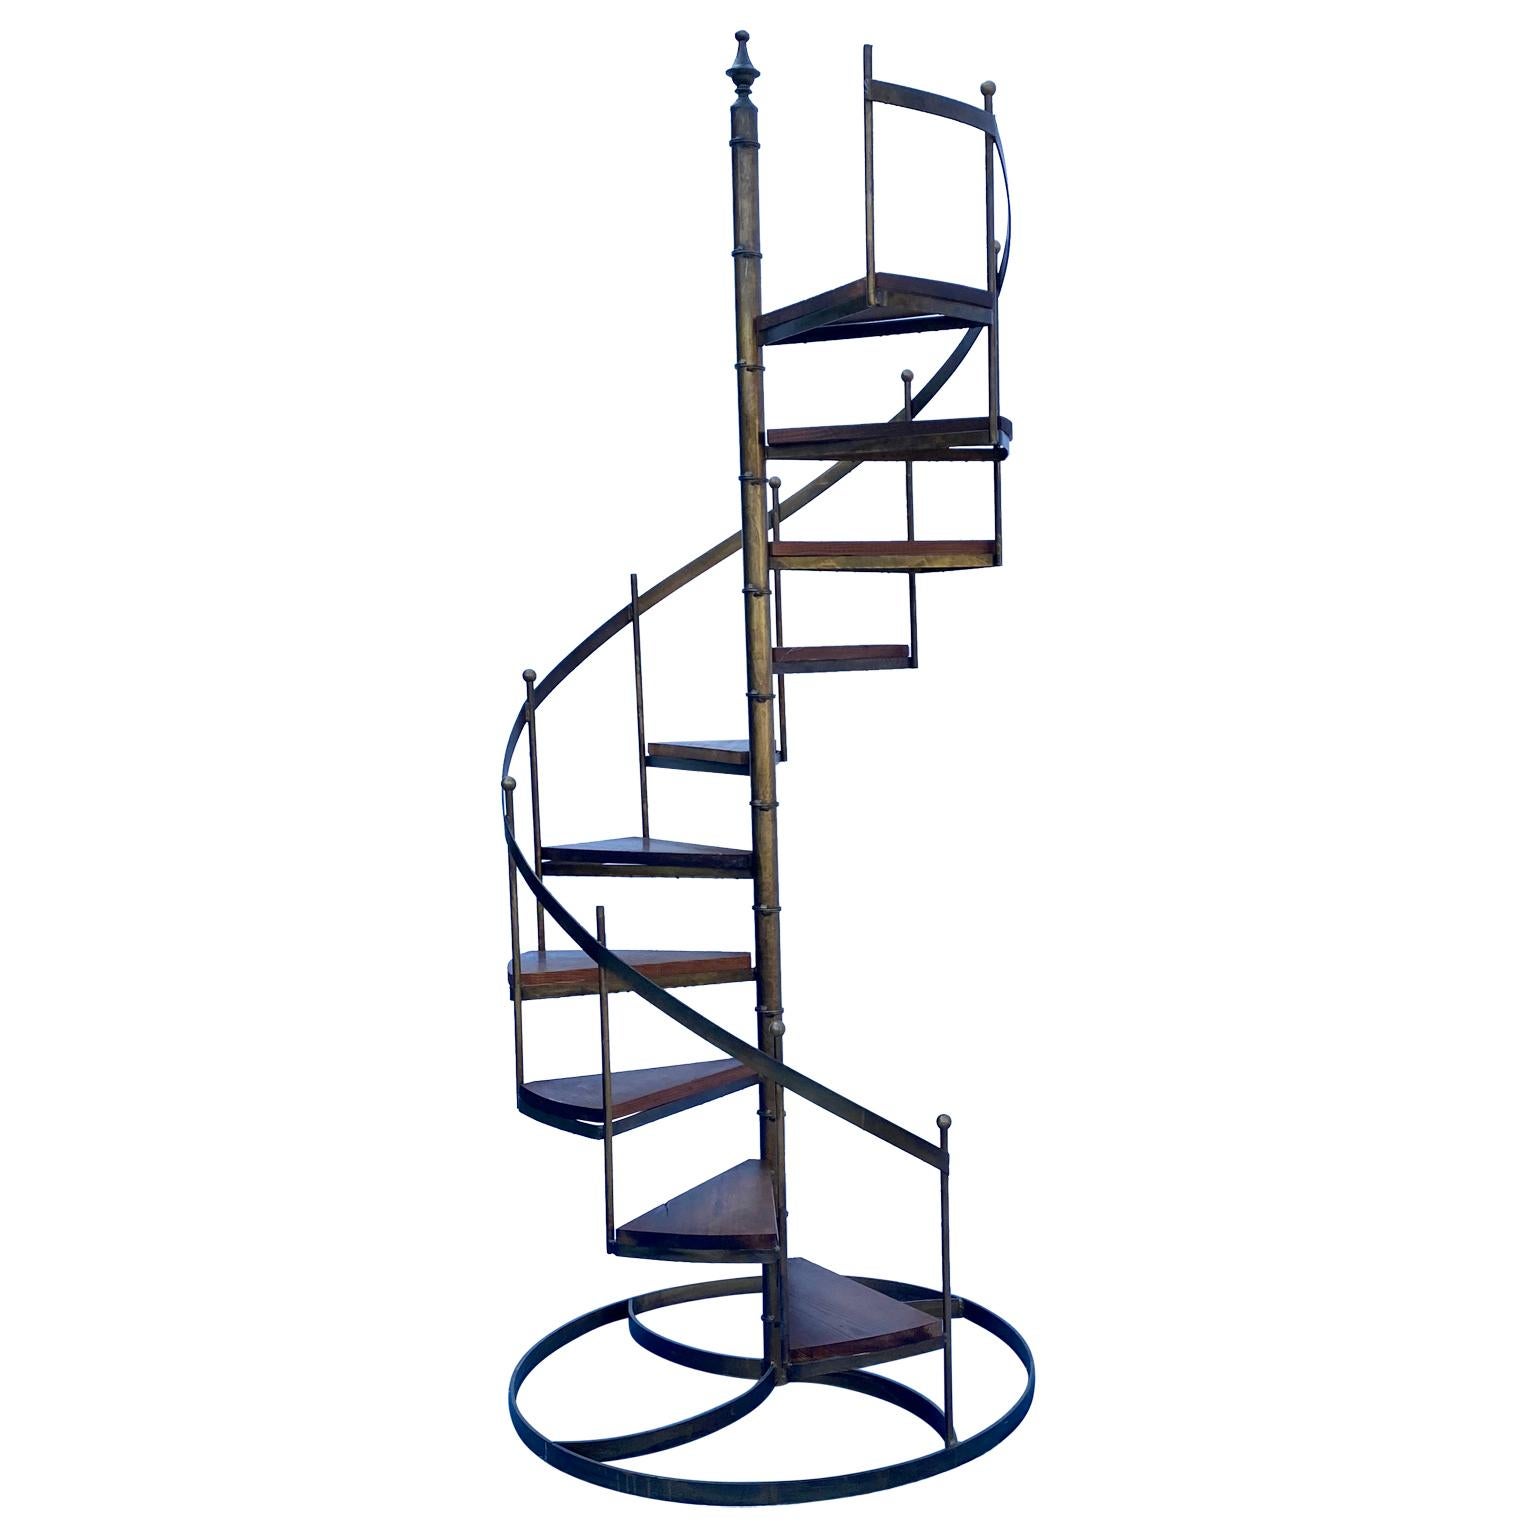 Bronzed Architectural Circular Wrought Iron Display Staircase